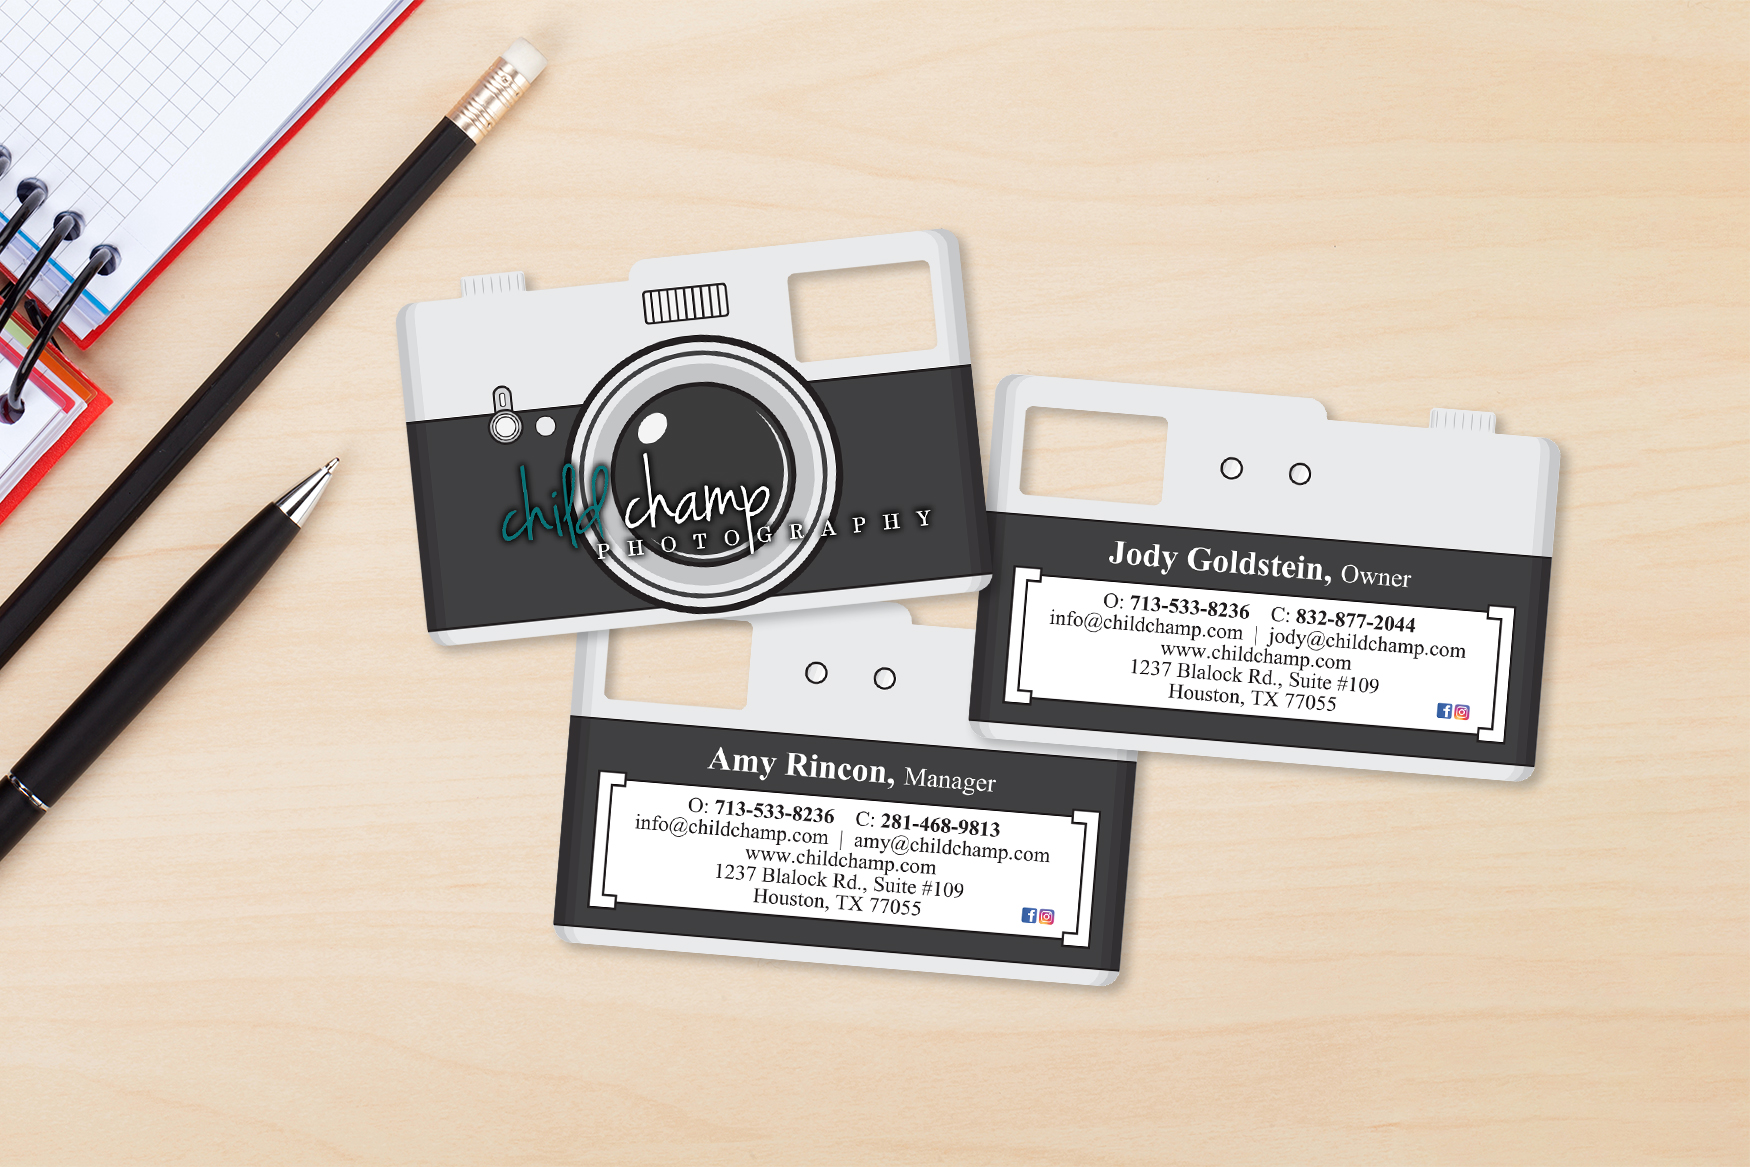 Child Camp Photography Business Cards